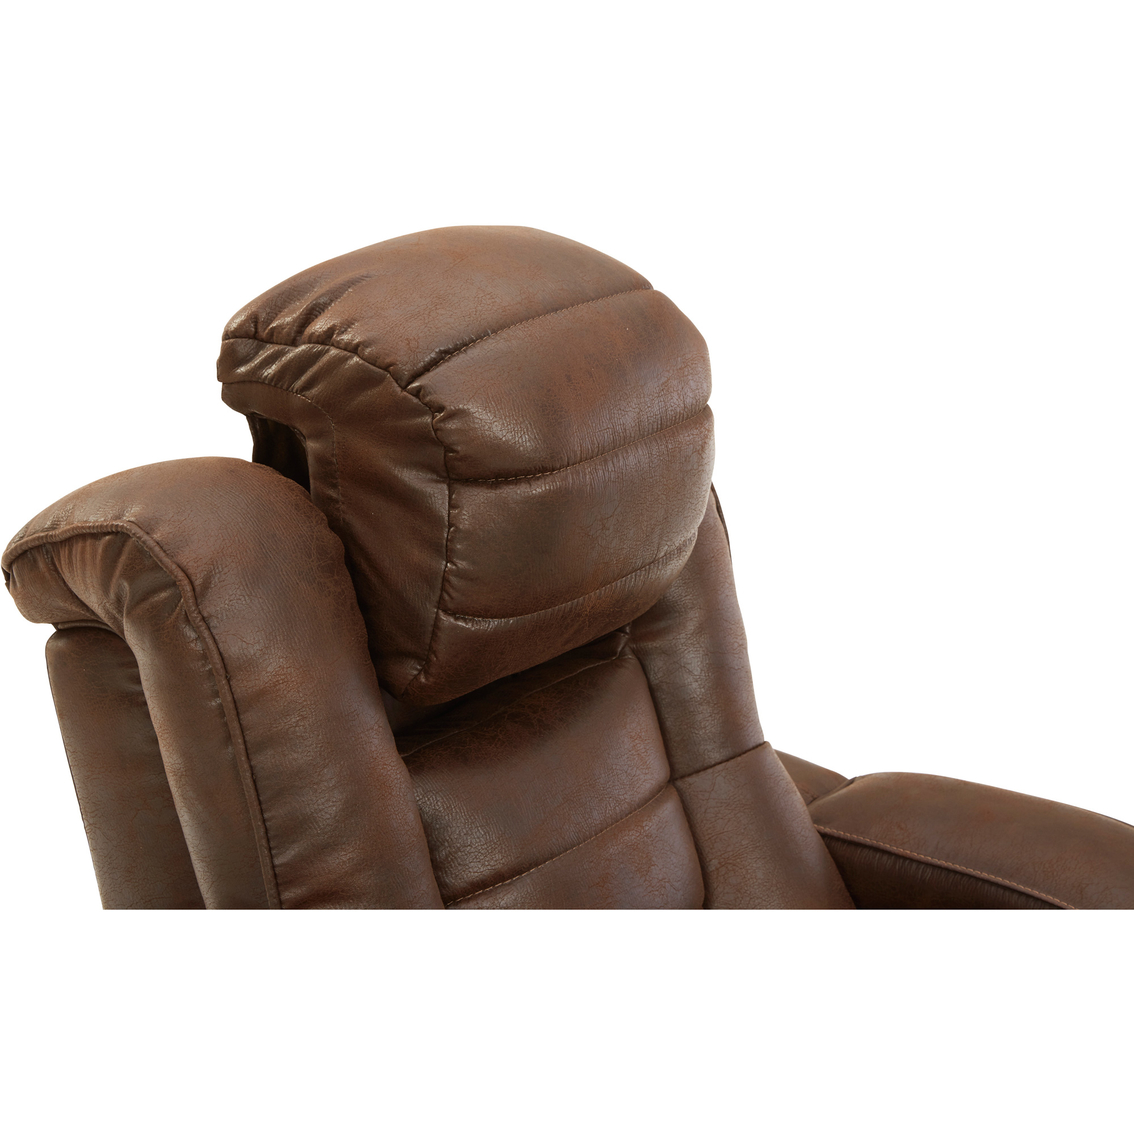 Signature Design by Ashley Owner's Box Power Recliner with Adjustable Headrest - Image 9 of 10